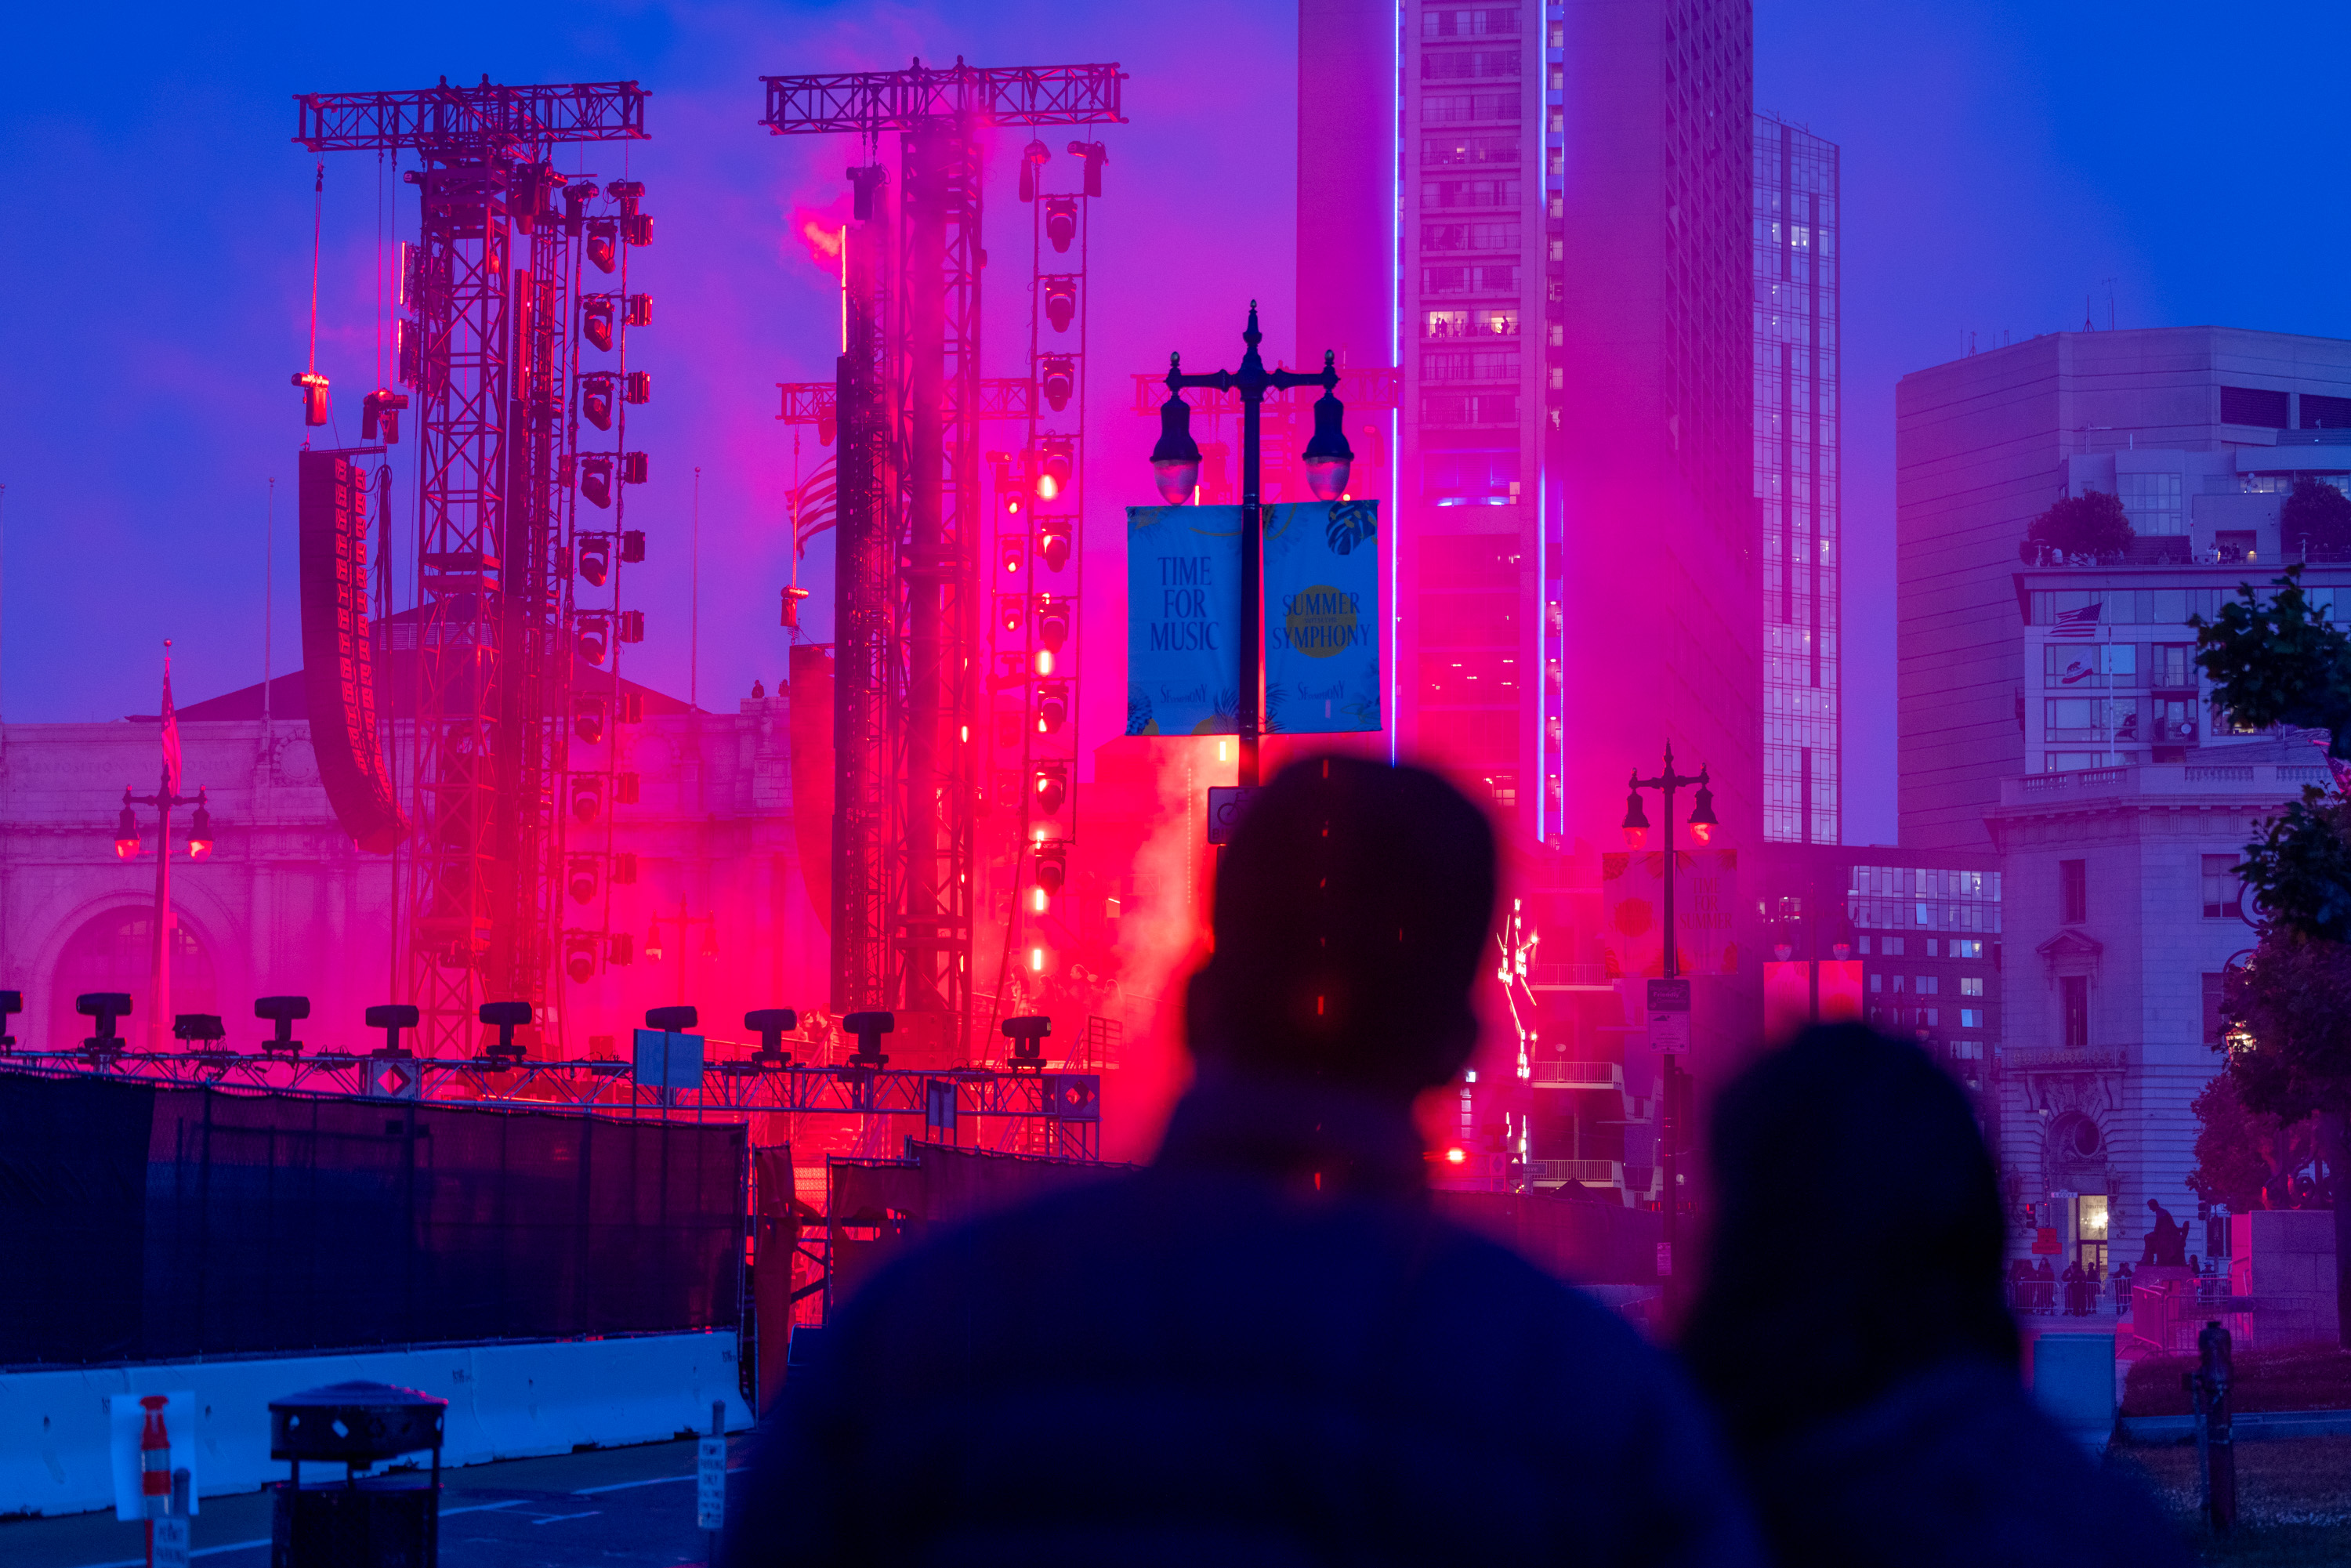 Two figures face a vibrant urban scene with bright red lights, stage equipment, and tall buildings at dusk. Banners read &quot;TIME FOR MUSIC&quot; and &quot;SUMMER SYMPHONY.&quot;